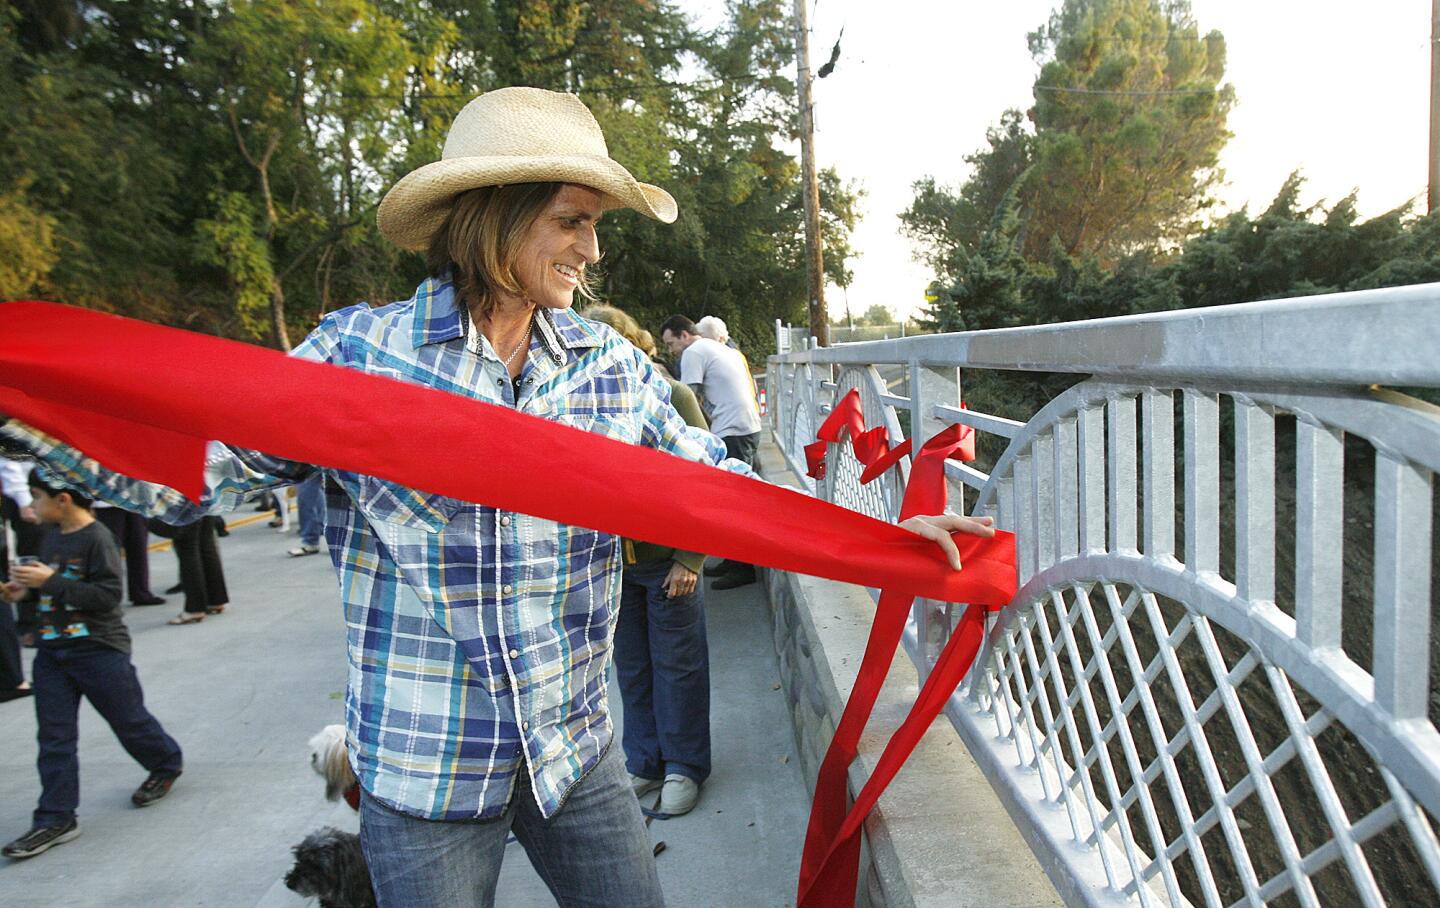 Julie Thurston, who lives near the Jessen Bridge, threads the red ribbon that was cut during the ribbon-cutting ceremony for the bridge into the safety rail as a decoration in La Canada-Flintrdige on Monday, November 26, 2012.